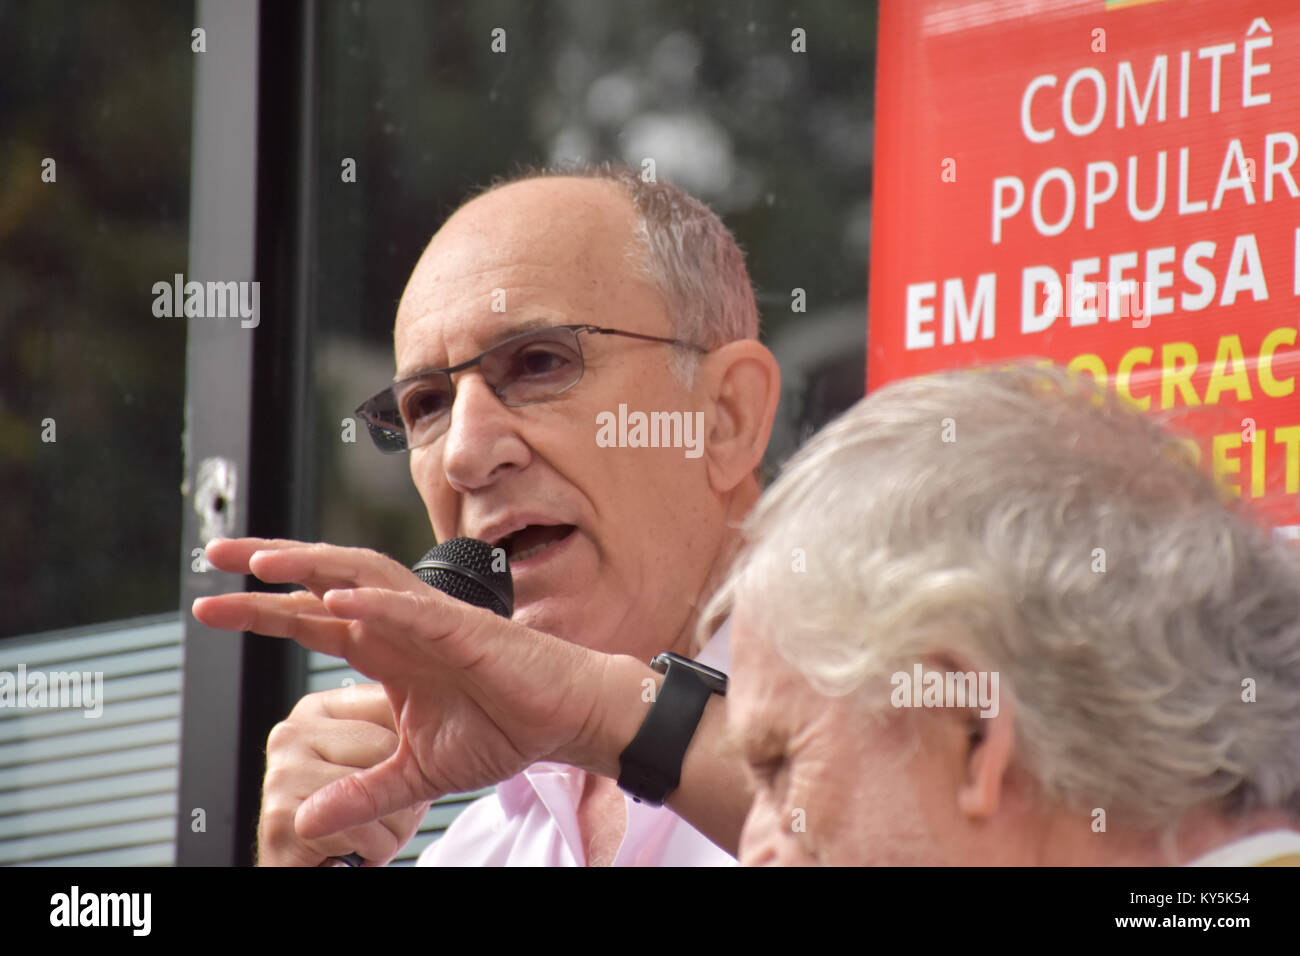 Sao Paulo, brazil. 13th January, 2018. On Saturday, (13) in São Paulo, the PT launched the Popular Committee on Defense of Democracy. The event was attended by politicians and artists linked to the party. In the photo Rui Falcão. (Photo: Roberto Casimiro/Fotoarena)/ Alamy Live News Stock Photo